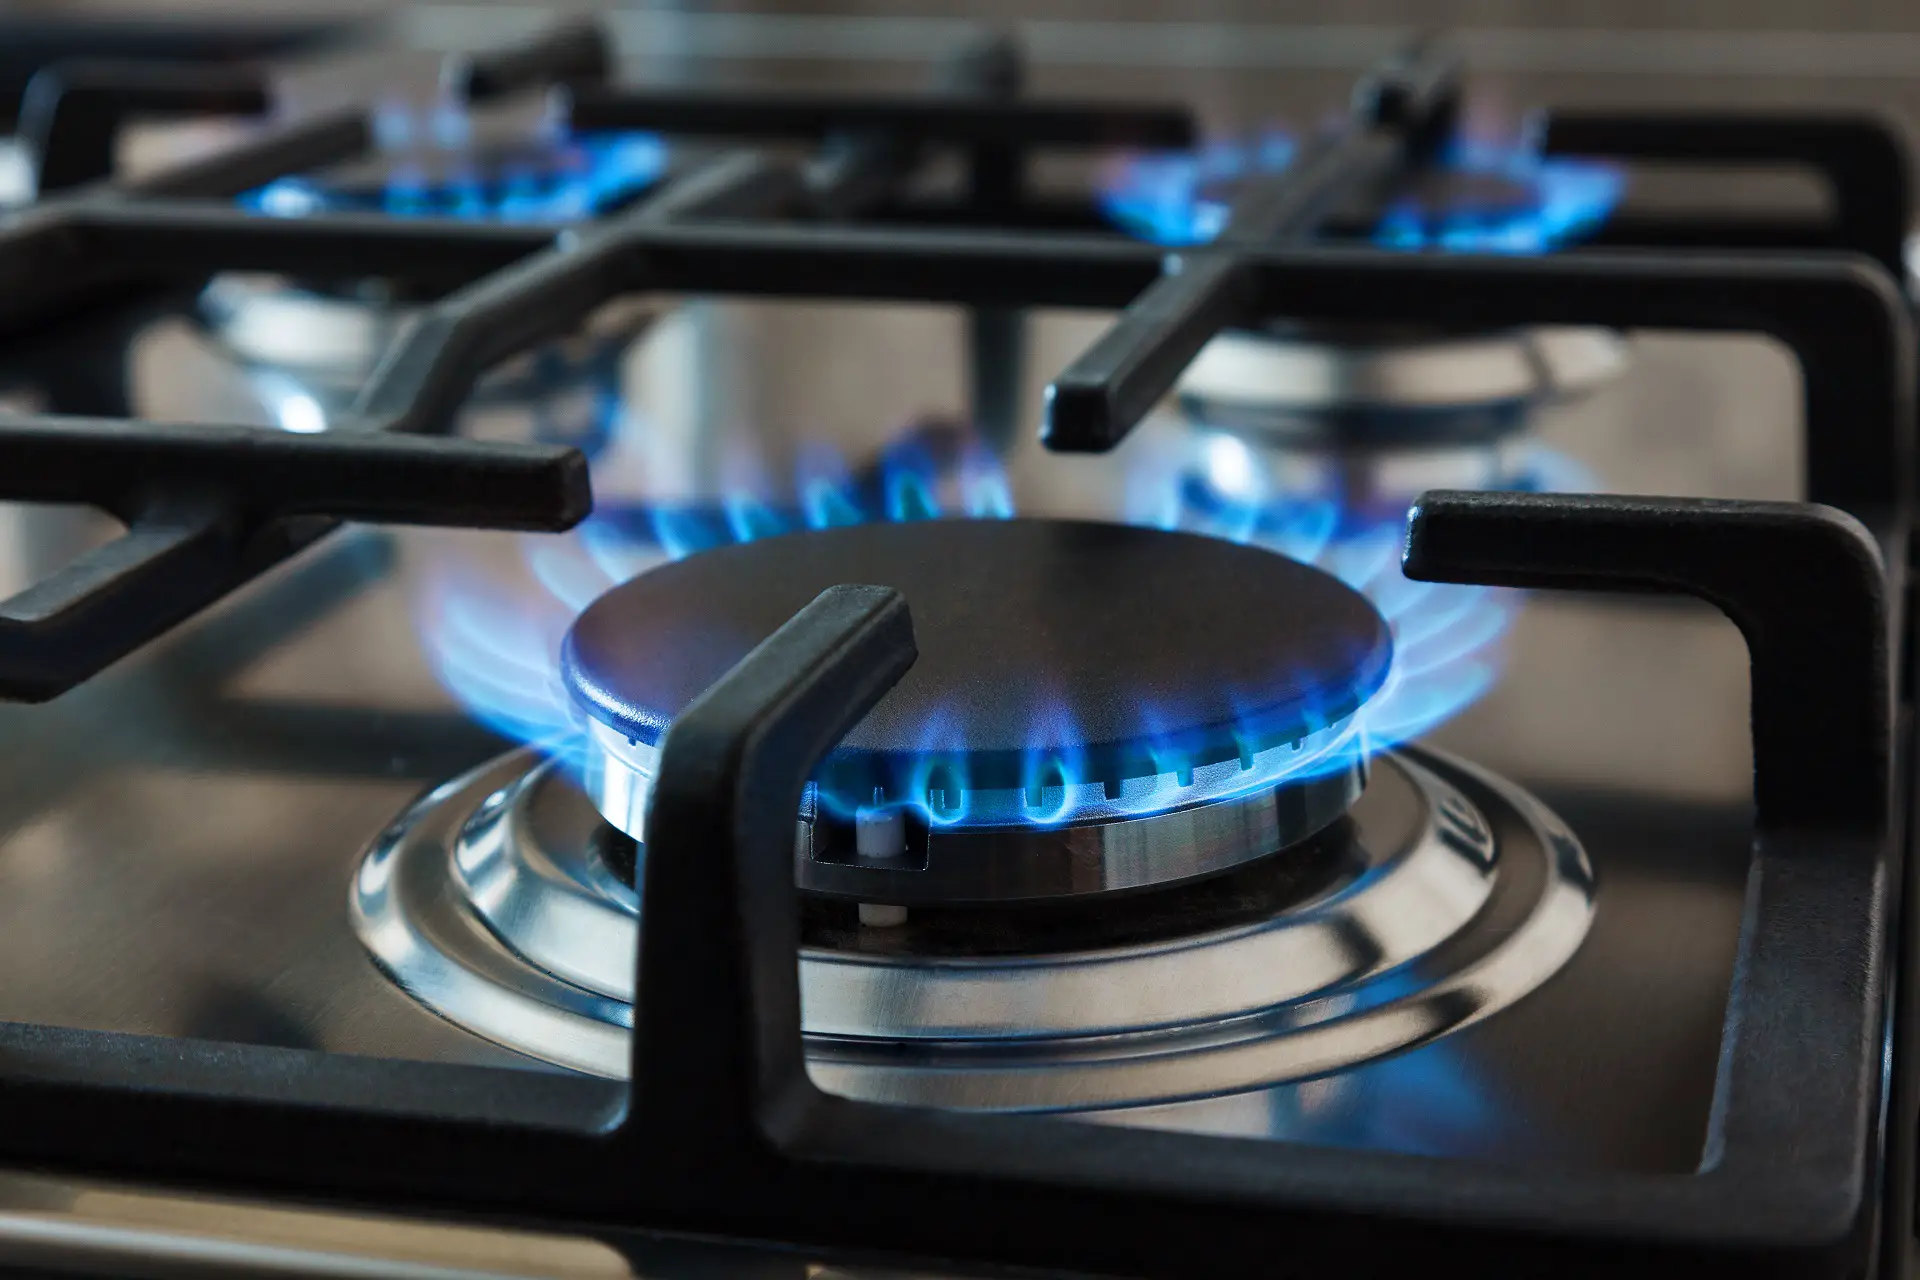 08.Professional-Gas-Ranges-for-the-Home-%E2%80%93-Buyer%E2%80%99s-Guide.jpg